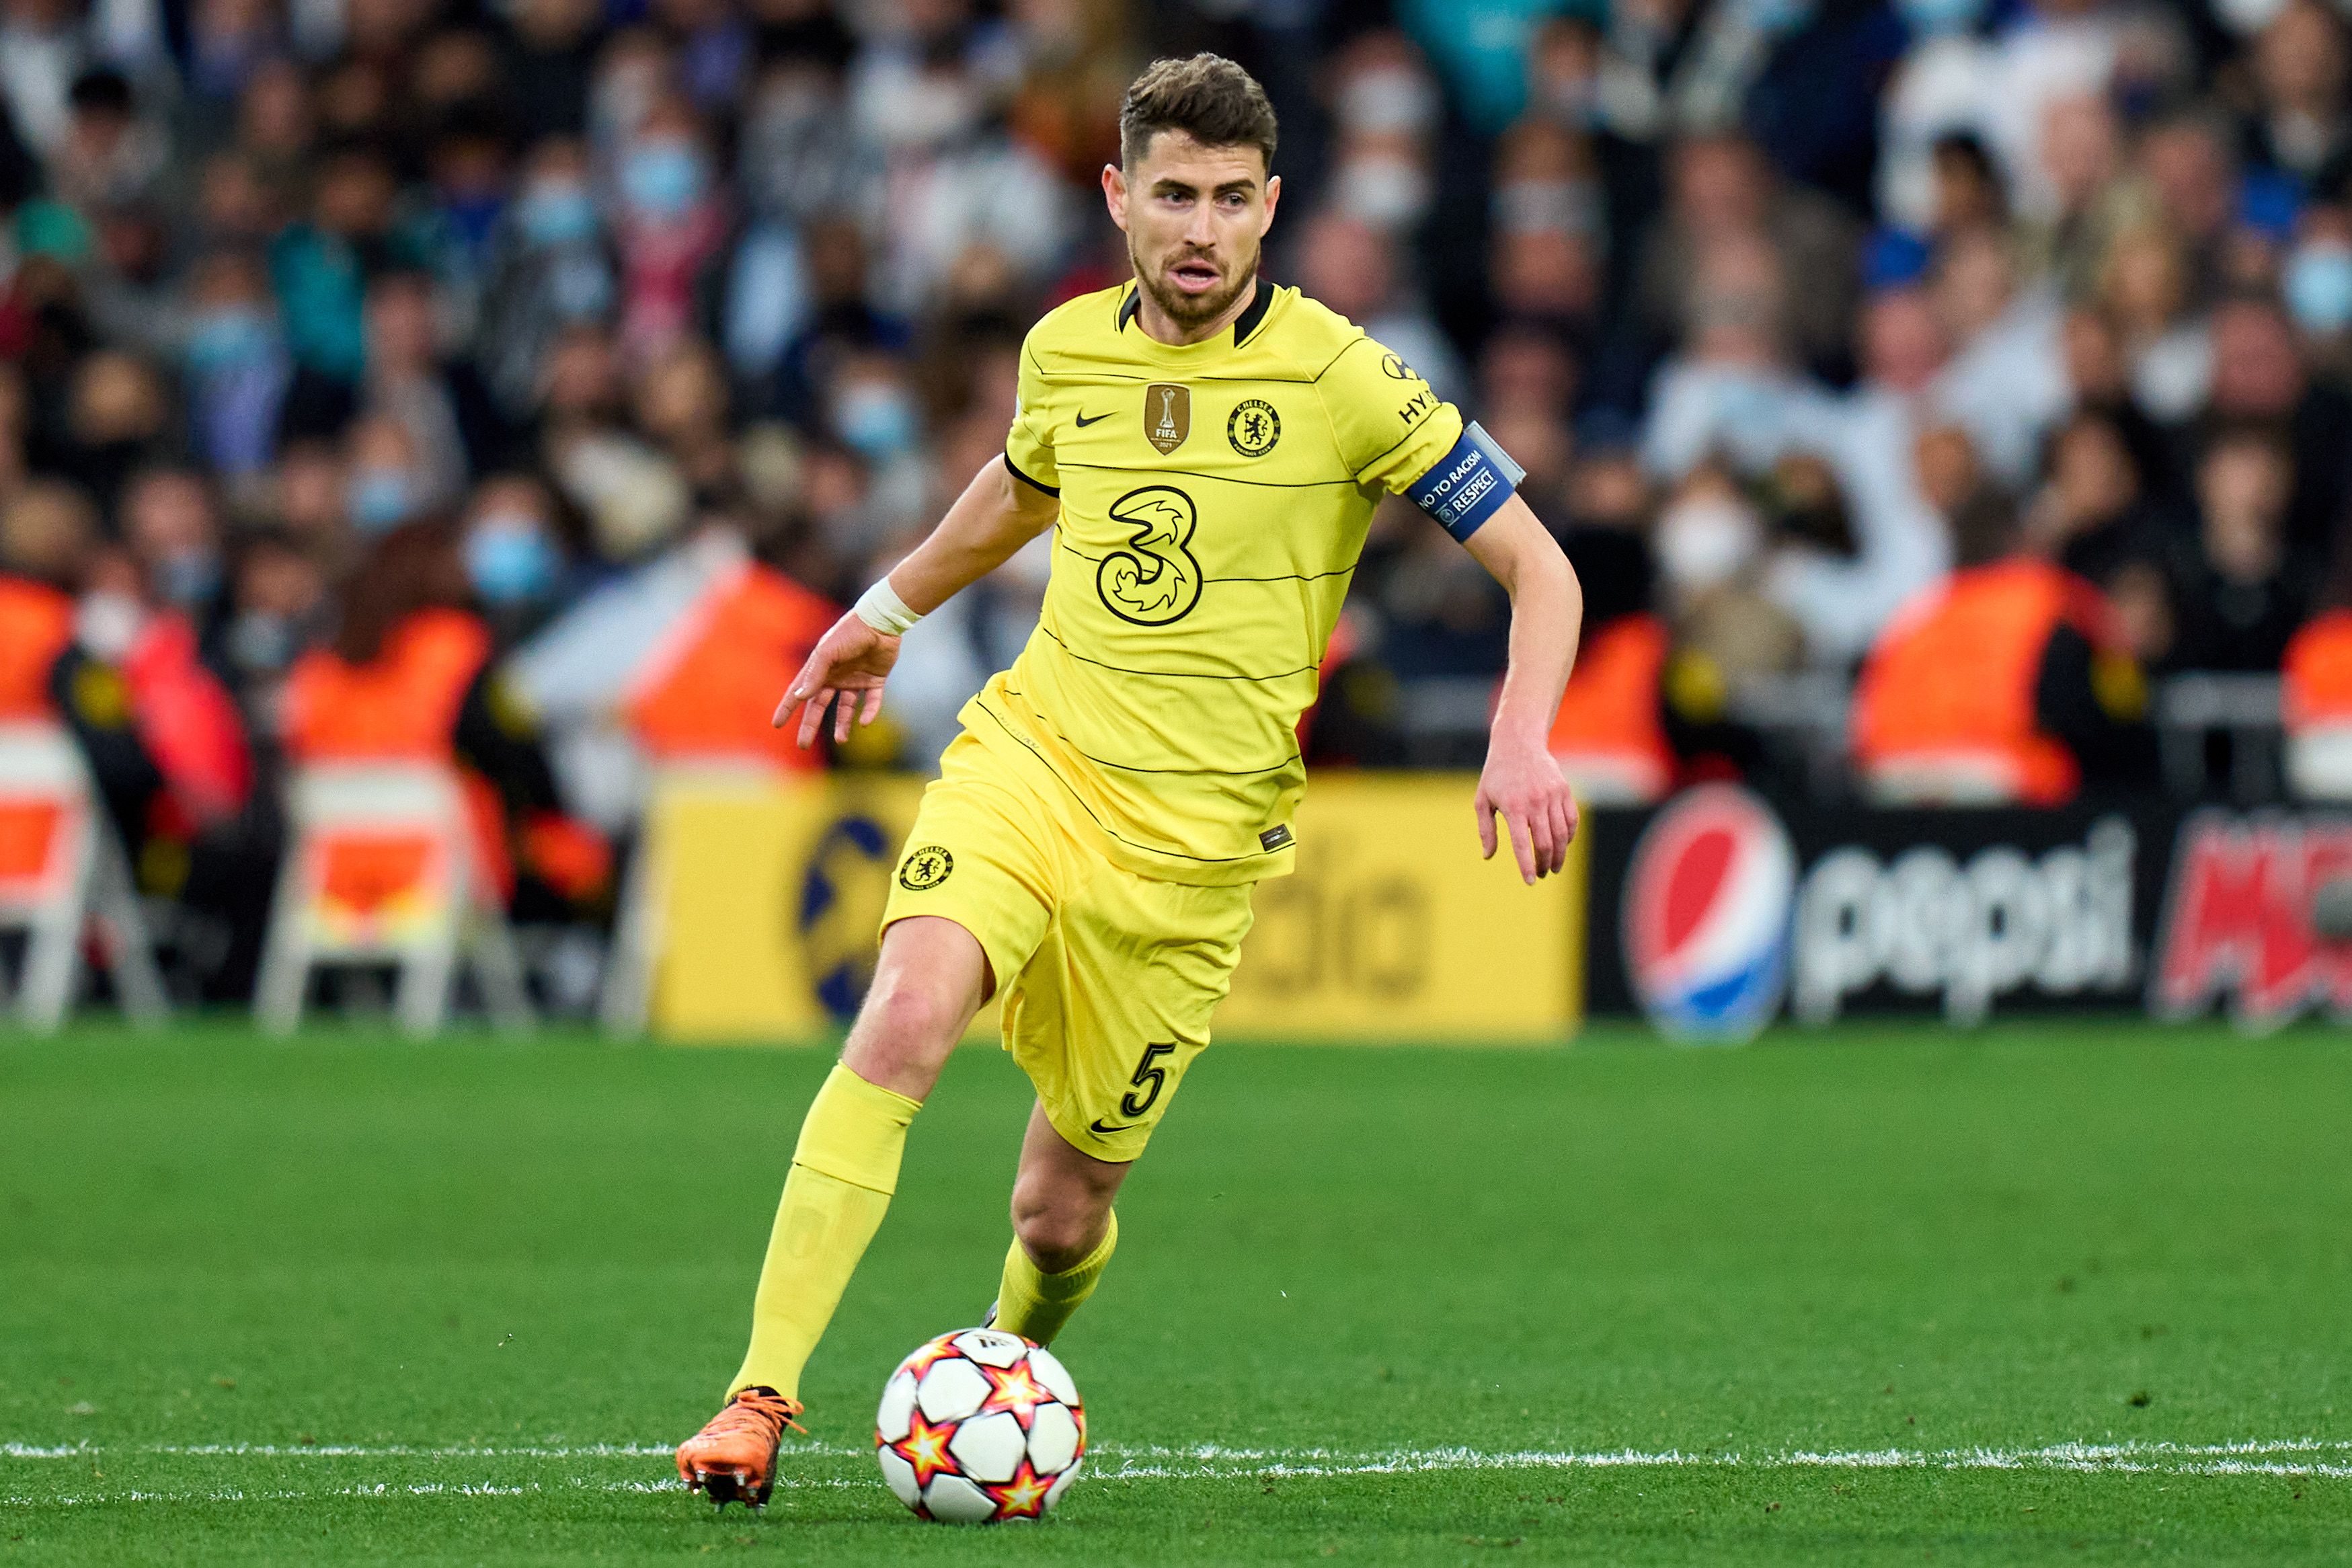 Jorginho of Chelsea FC in action during the UEFA Champions League Quarter Final Leg Two match between Real Madrid and Chelsea FC at Estadio Santiago Bernabeu on April 12, 2022